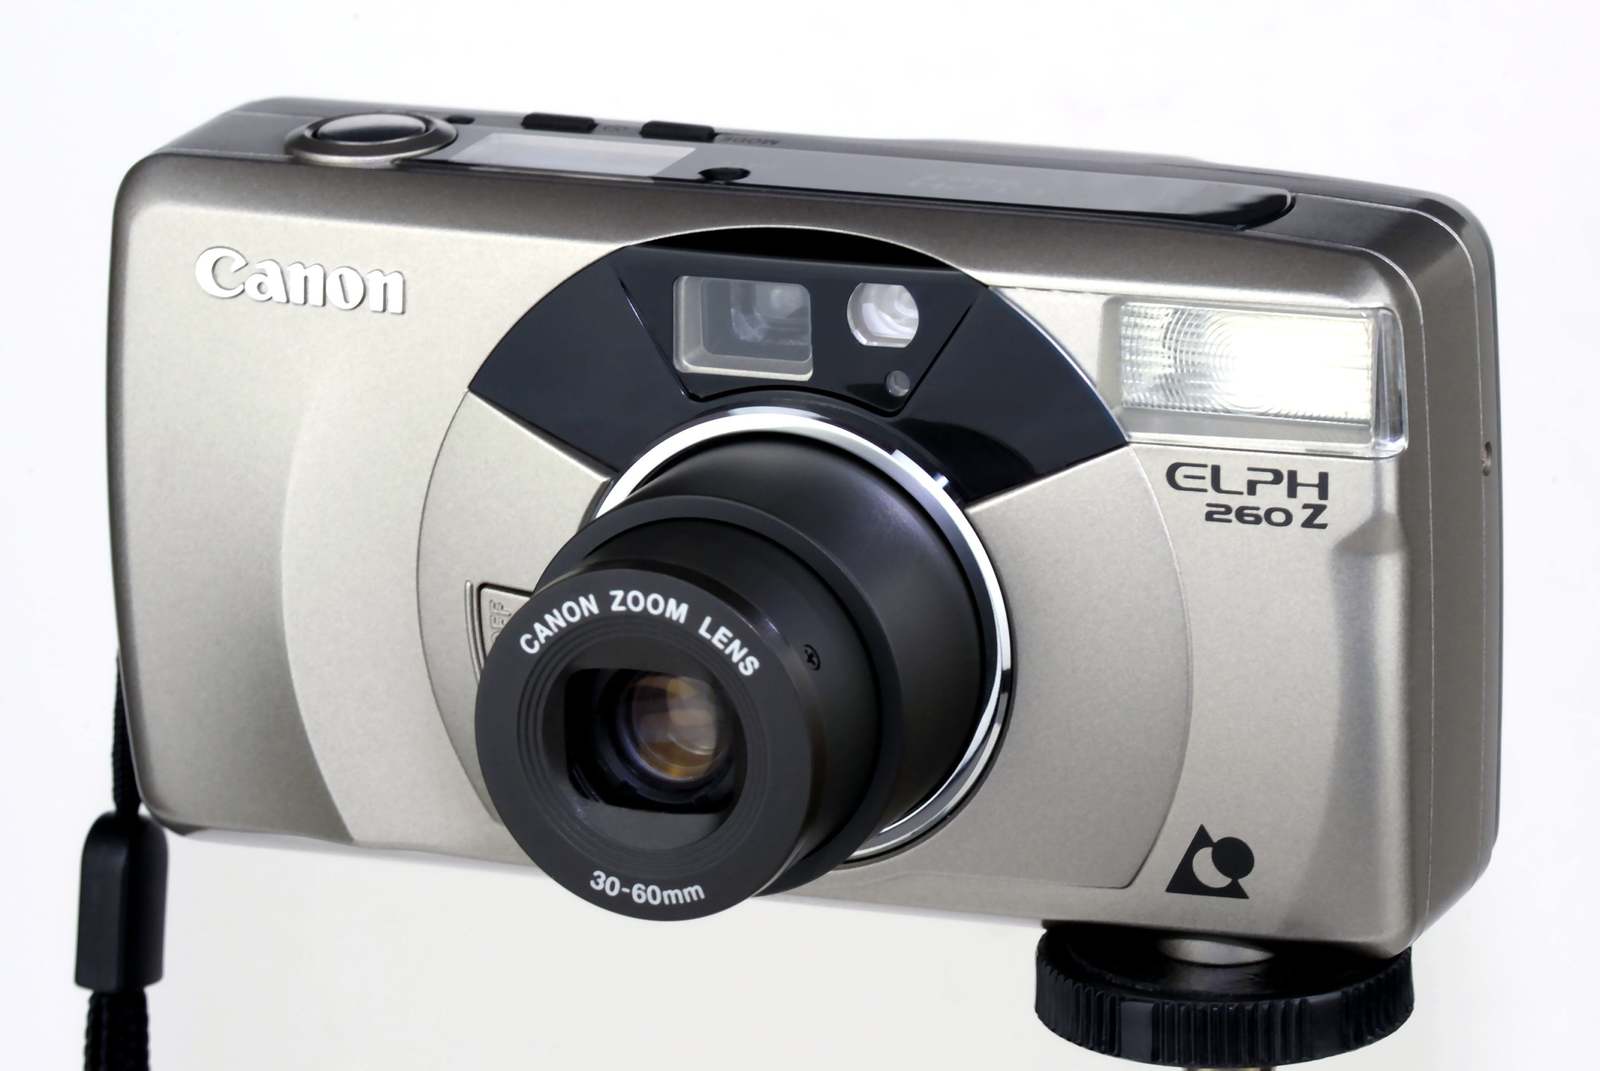 Canon Point & Shoot 260 Z Elph APS Film Camera w 30-60mm Zoom Lens REaLLY NiCE! - £46.29 GBP